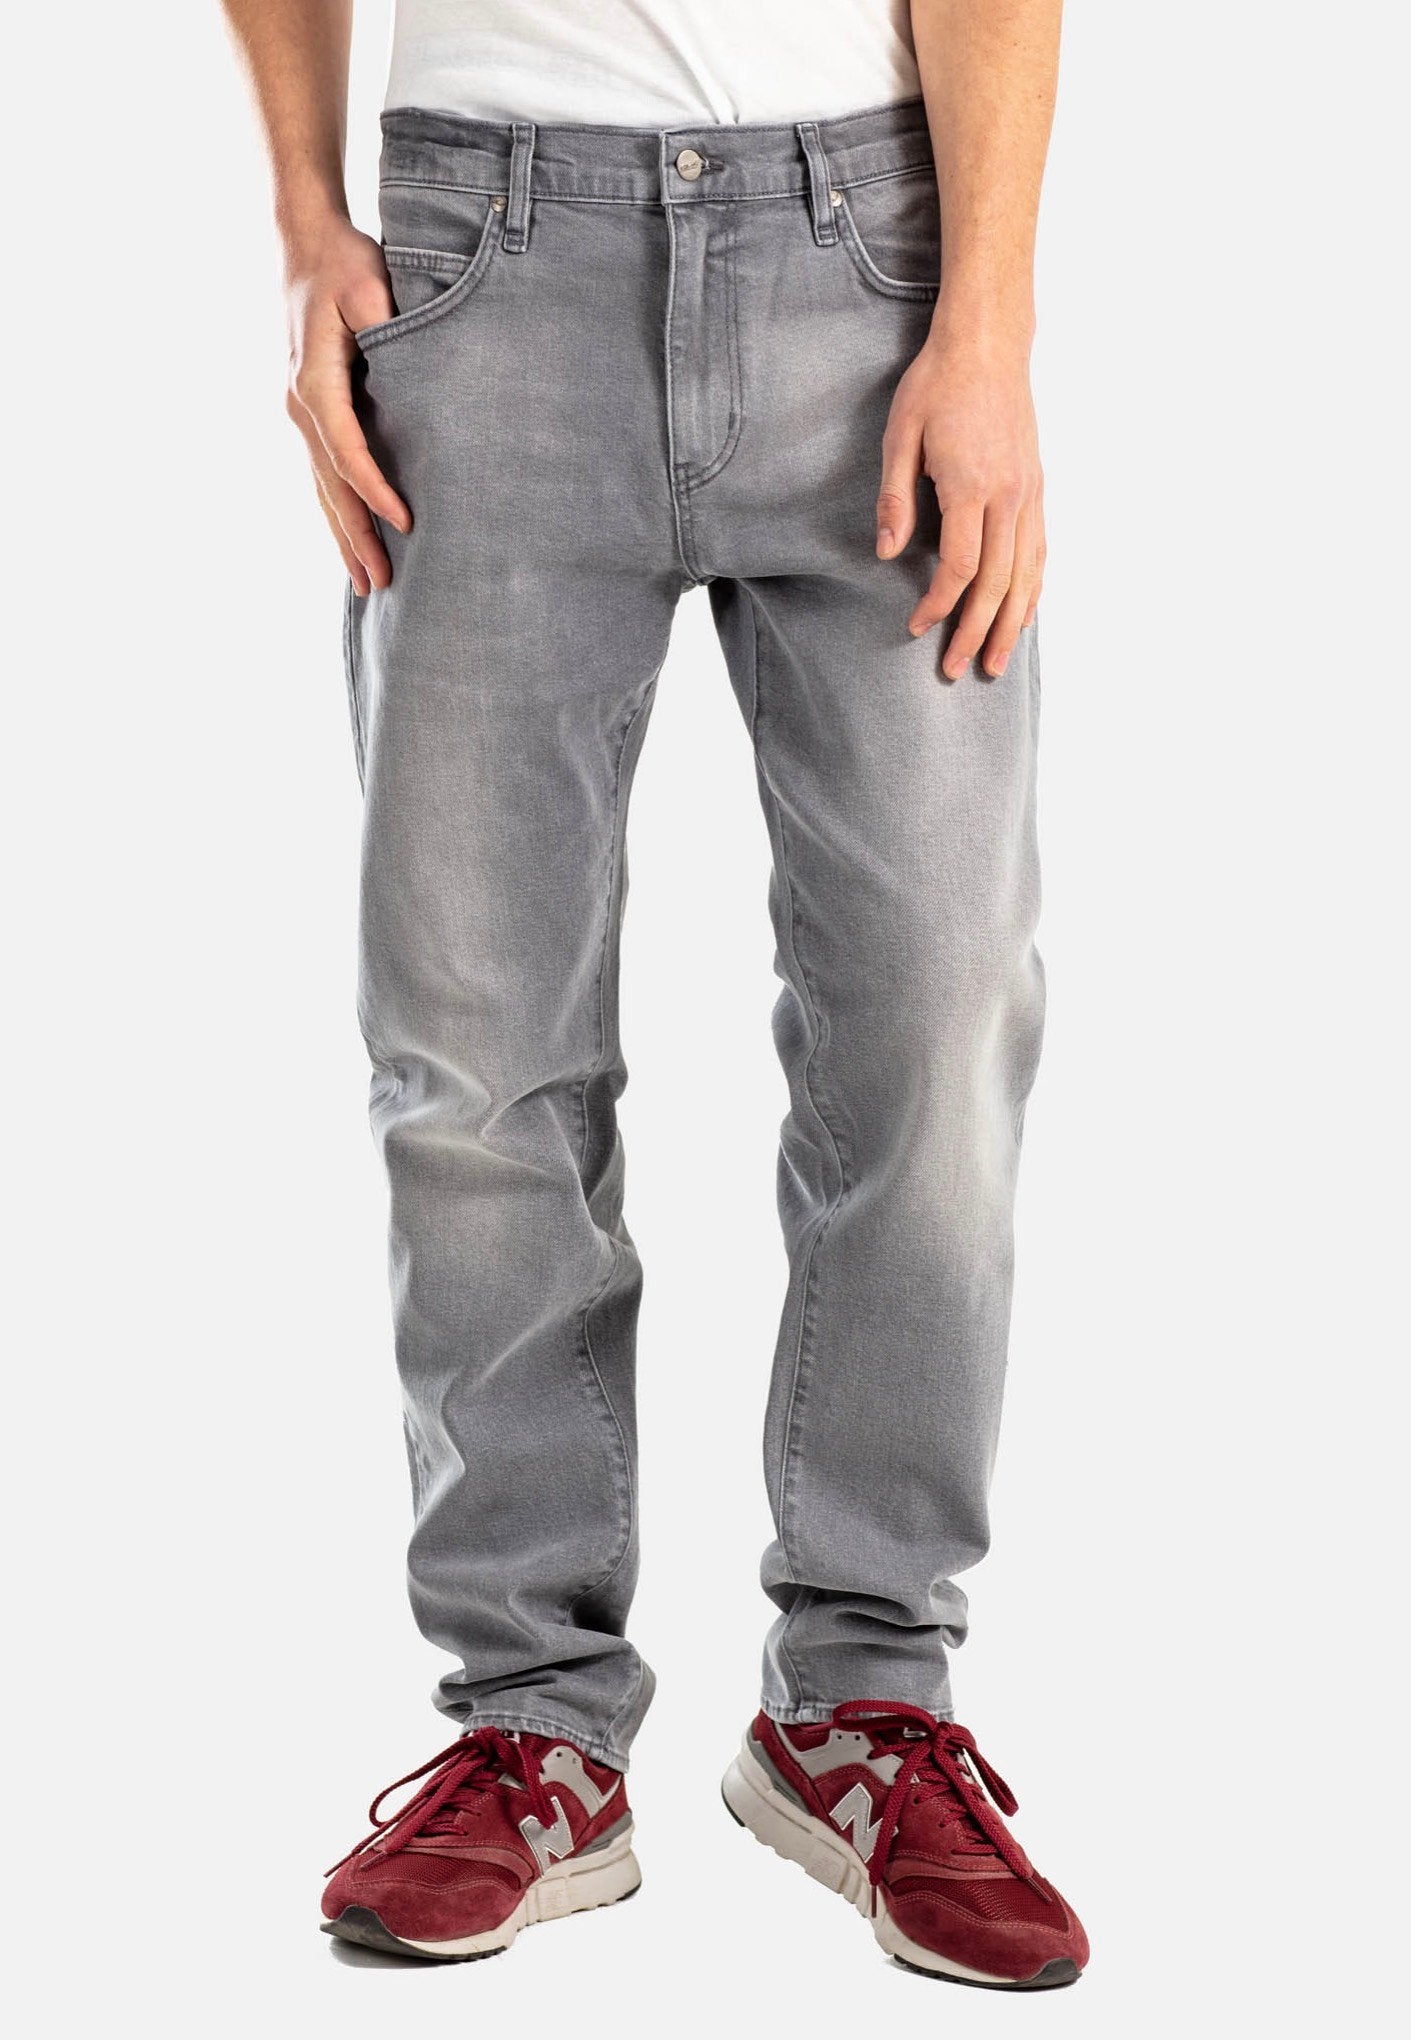 REELL - Barfly Concrete Grey - Jeans